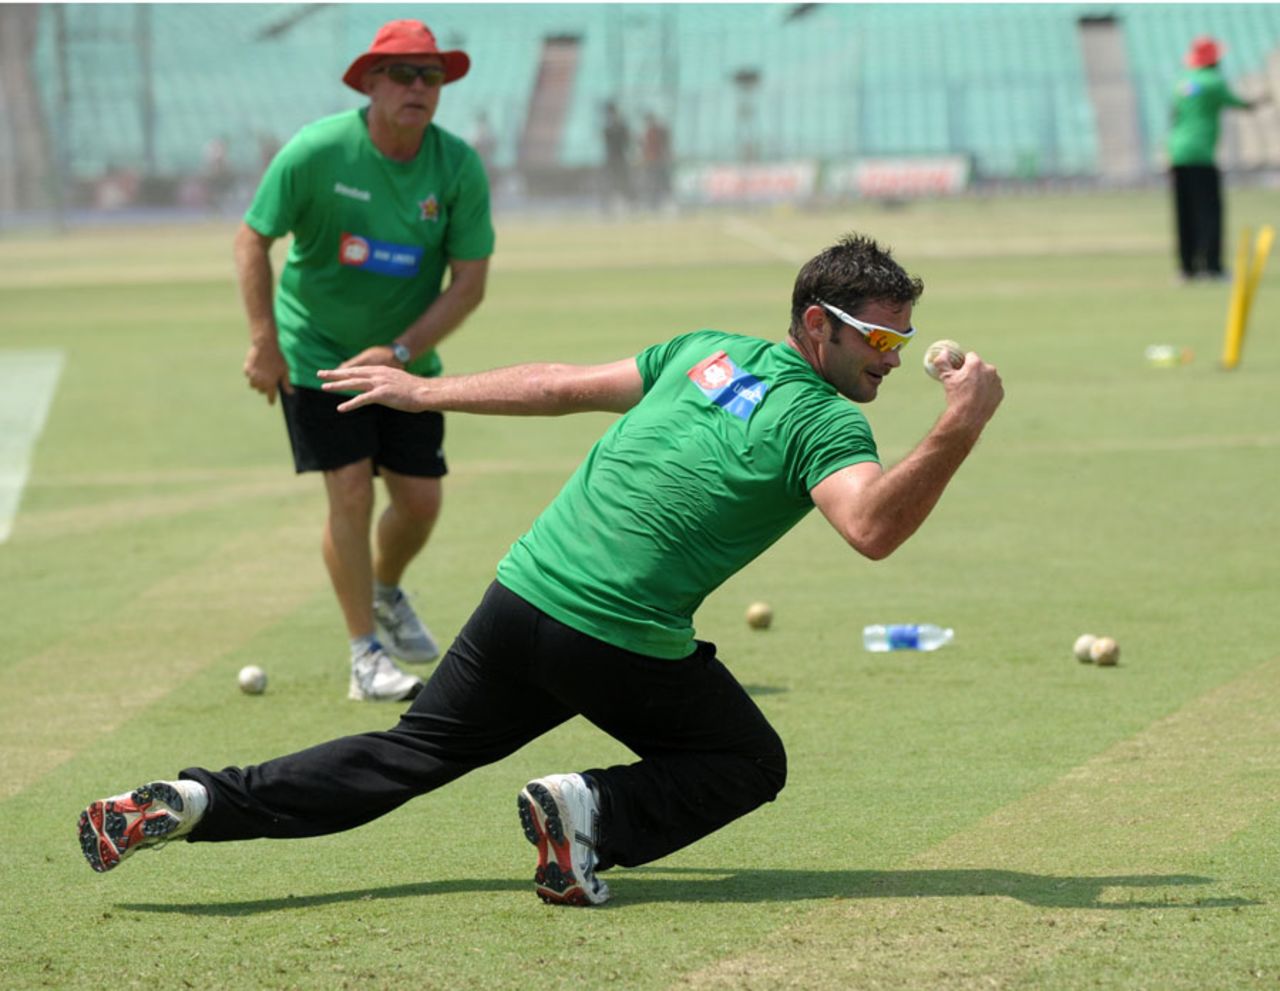 Greg Lamb is put through the paces during fielding practice, Kolkata, March 19, 2011